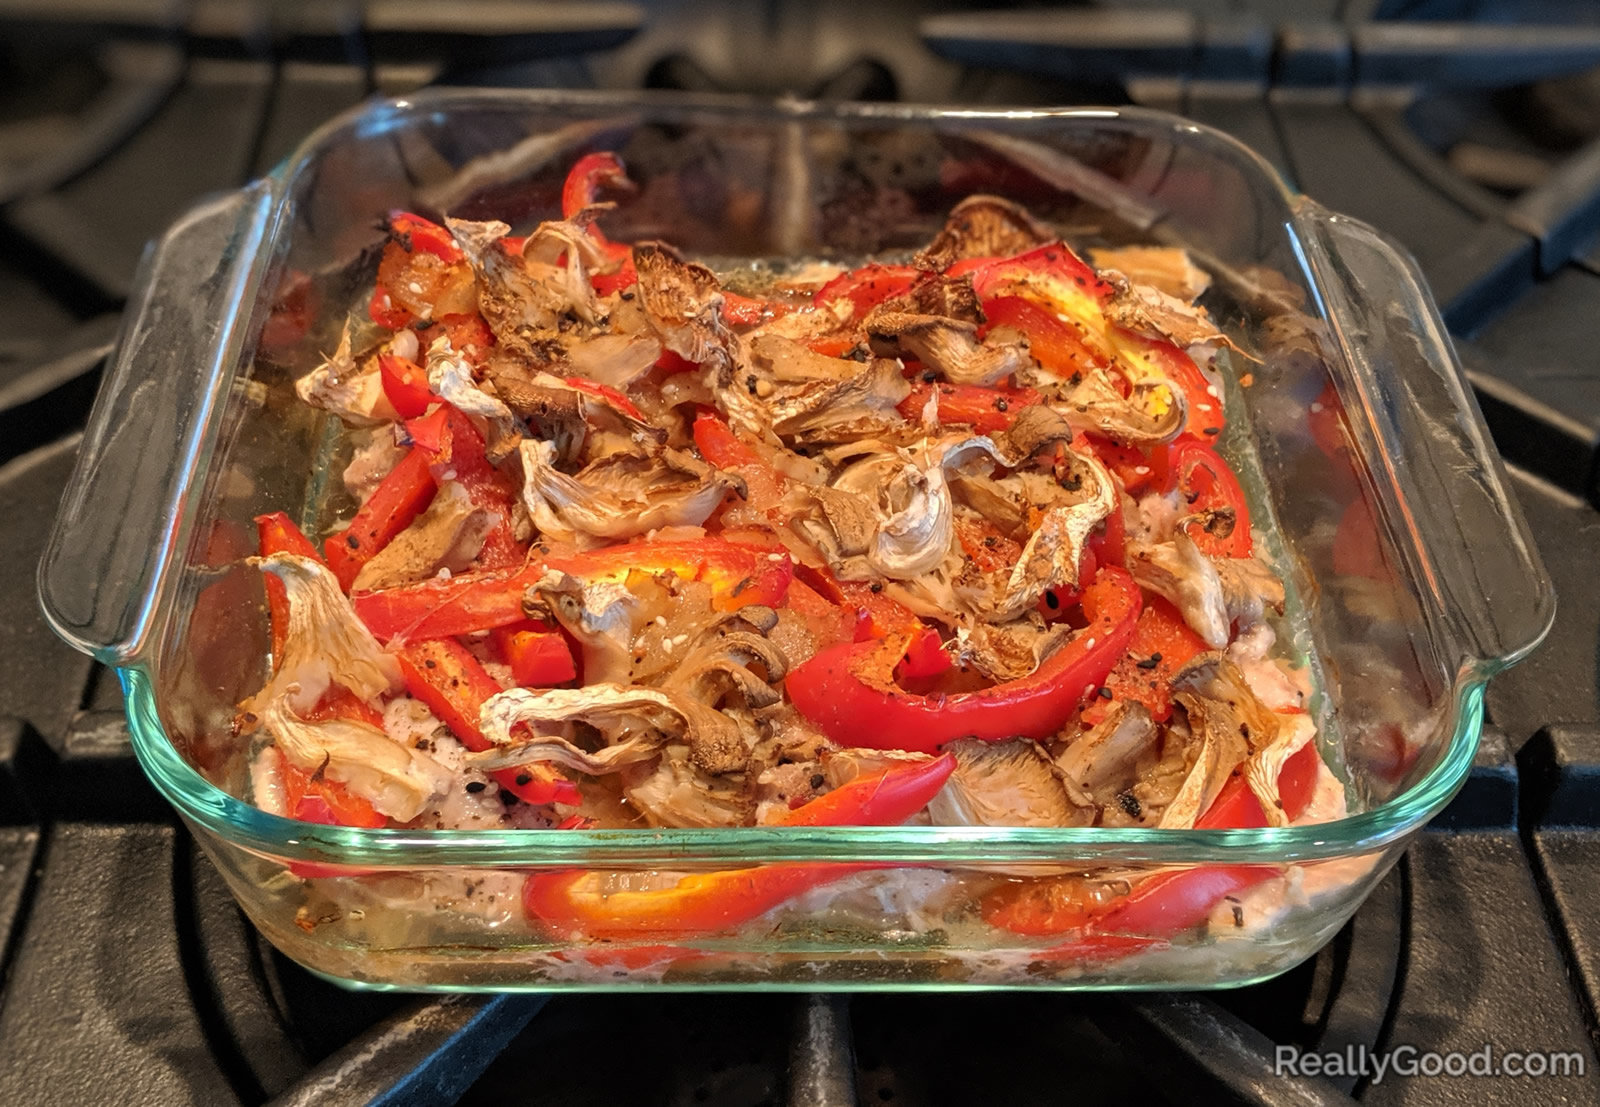 Roasted mushrooms and peppers